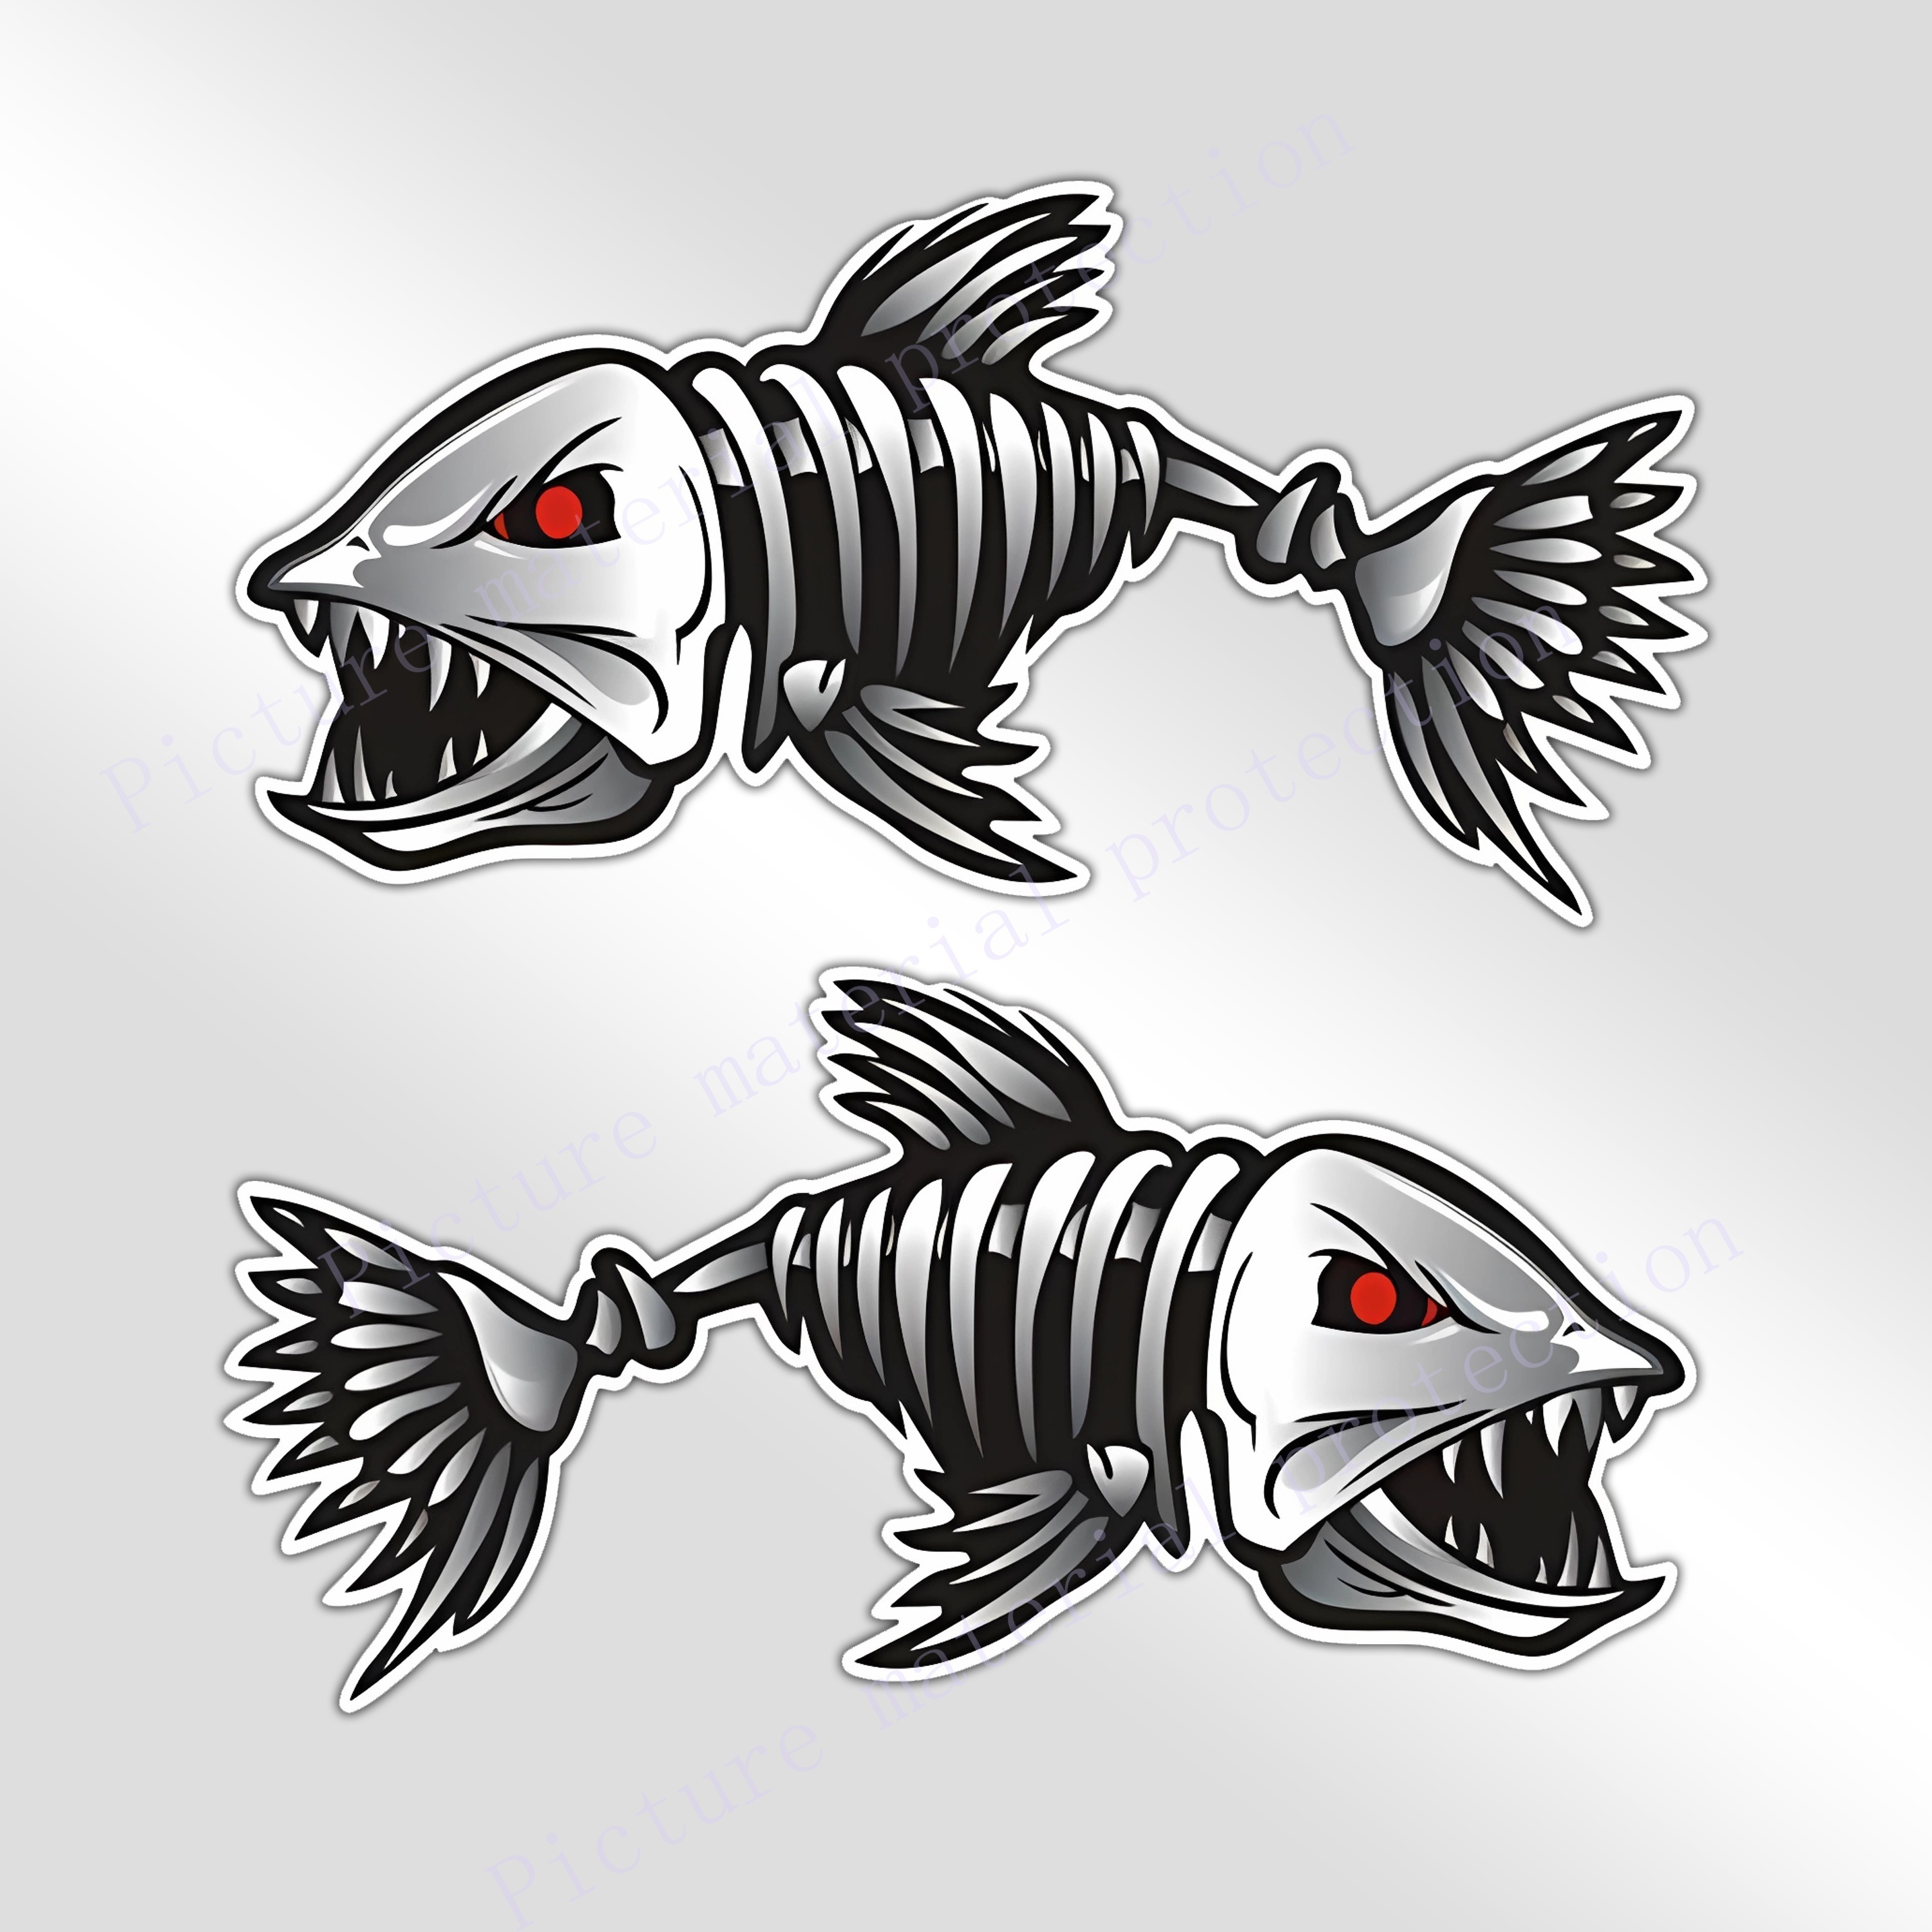 Fish Decal for Truck Fishing Gifts for Men Fishing Decals for